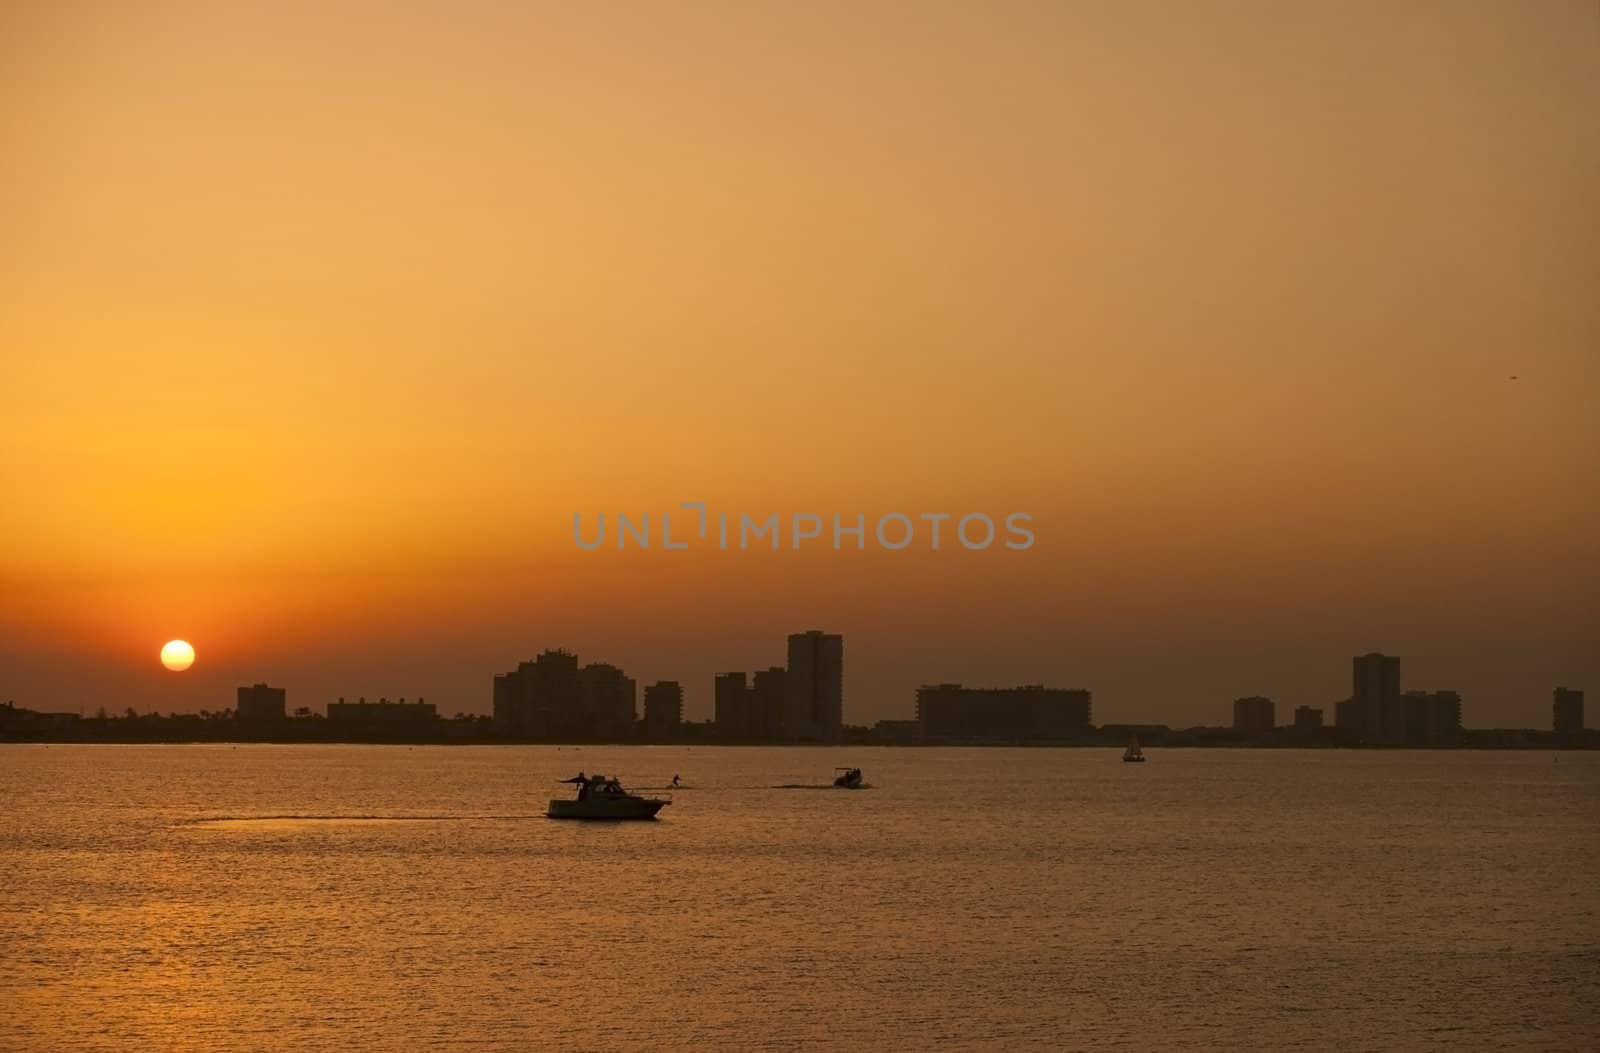 Beautiful sunset above the sea with boats and people practising aquatic sports